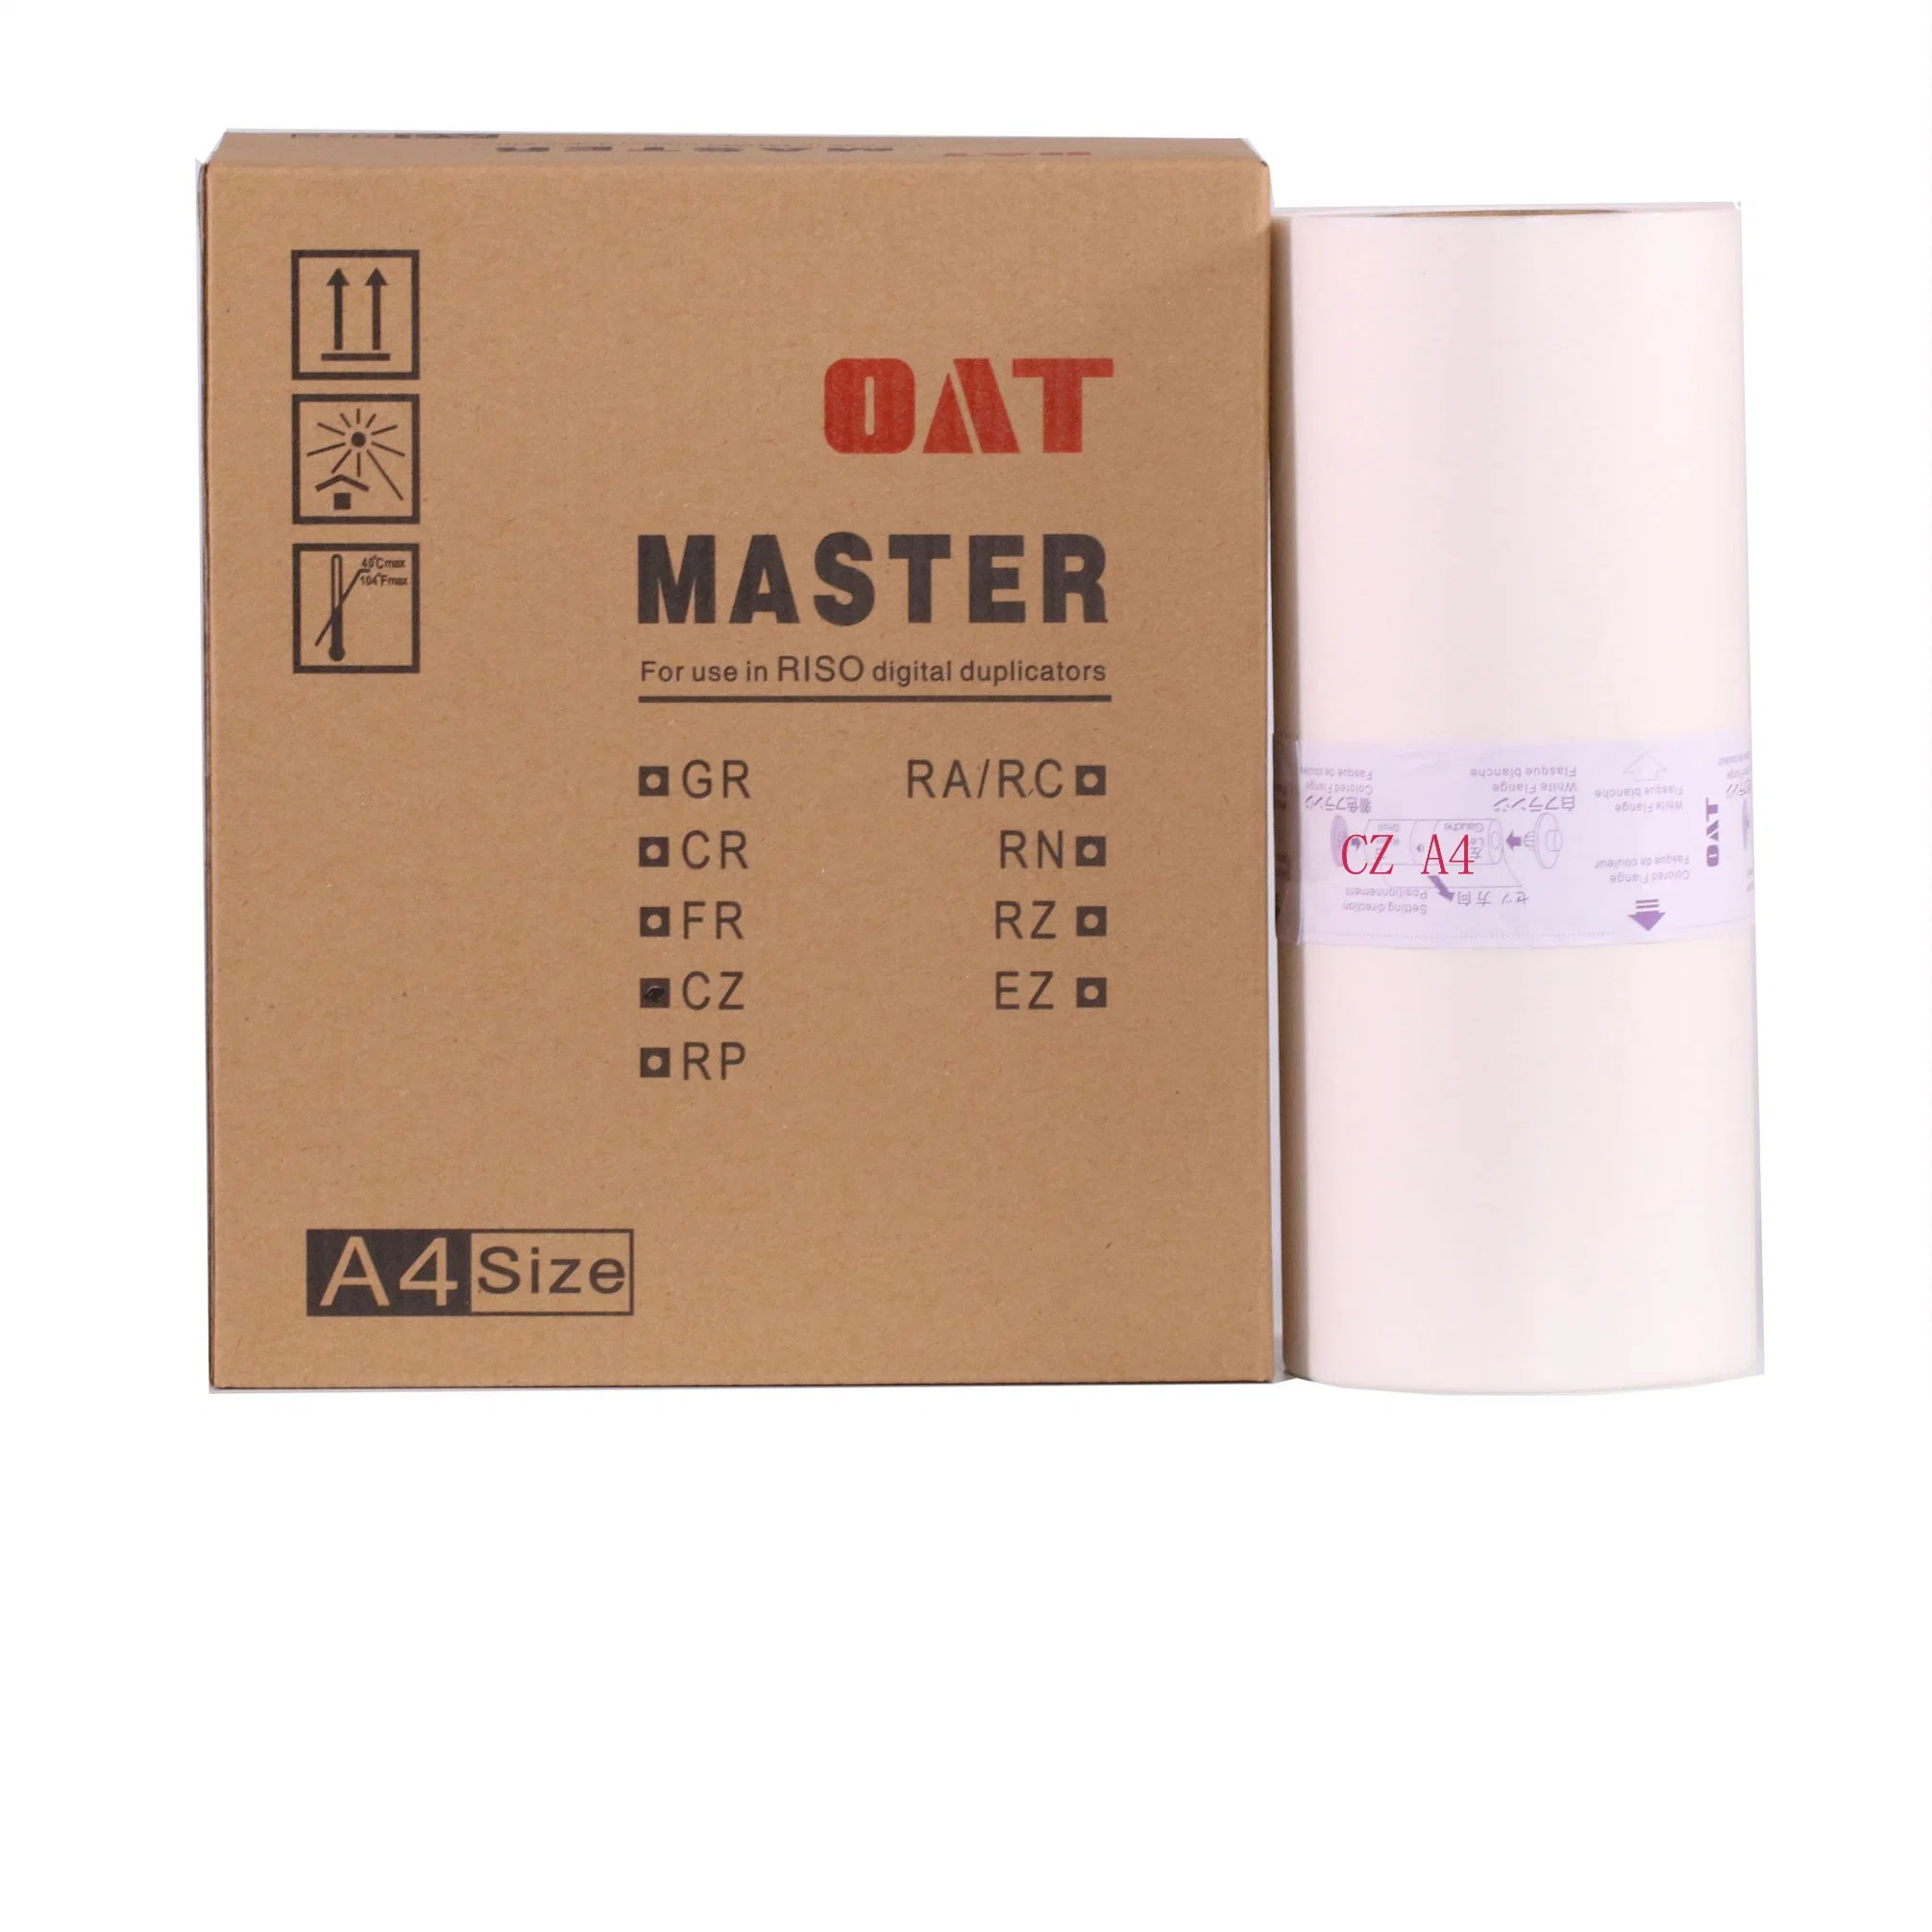 Compatible CZ A4 Master for Use in CZ Digital Duplicator